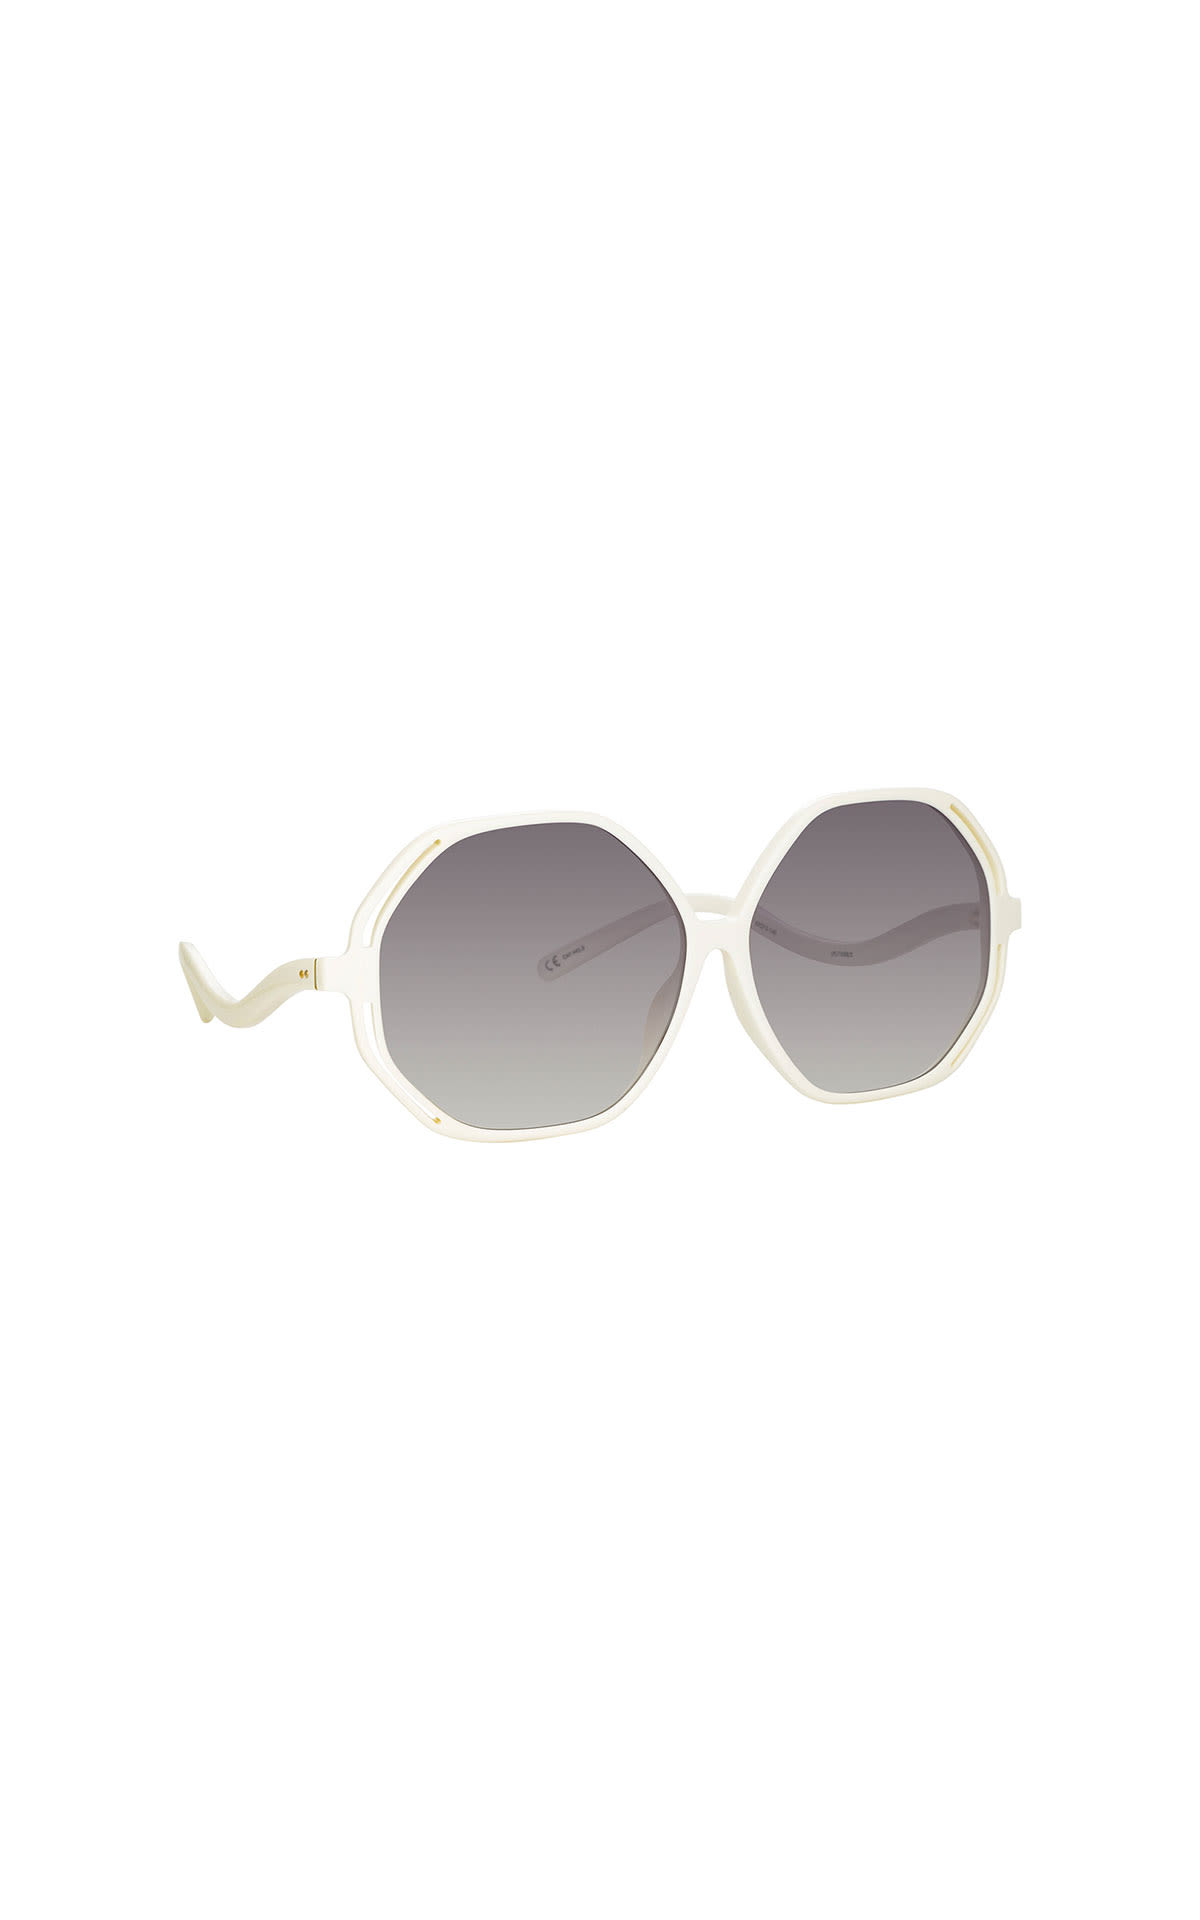 Linda Farrow Una white, light gold and grey grad from Bicester Village